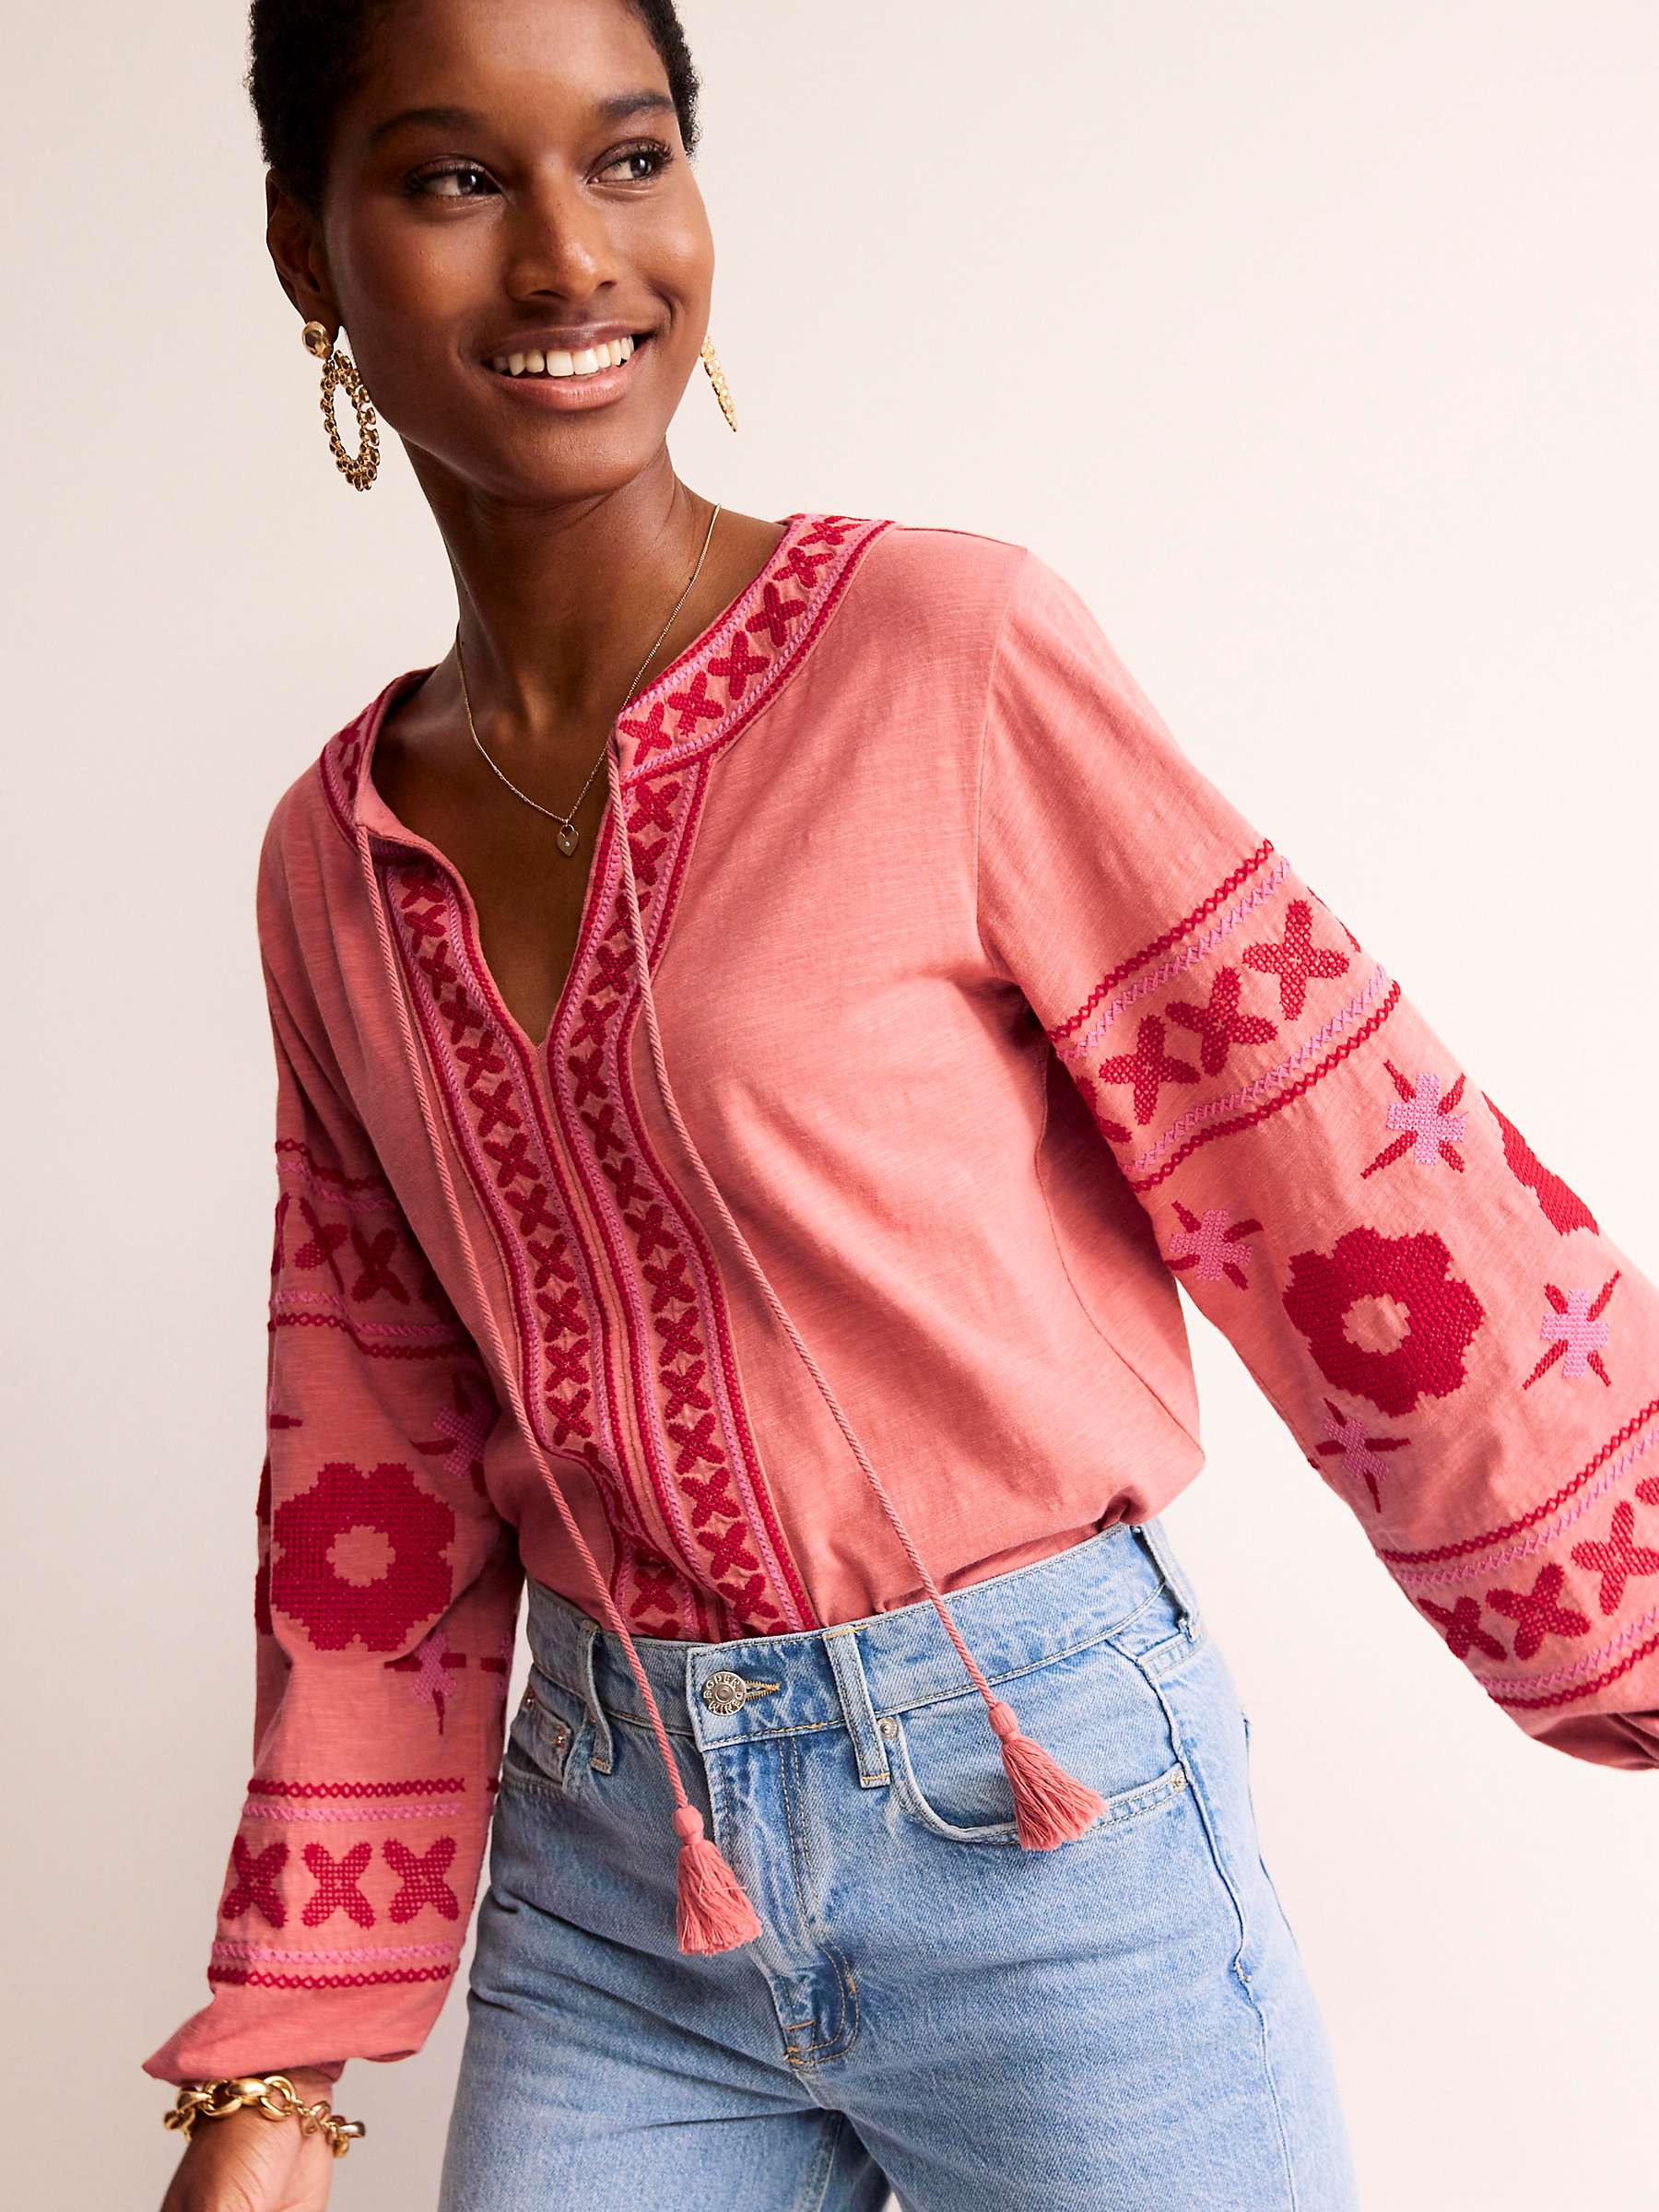 Buy Boden Diana Tie Neck Embroidered Top, Brick Dust Online at johnlewis.com